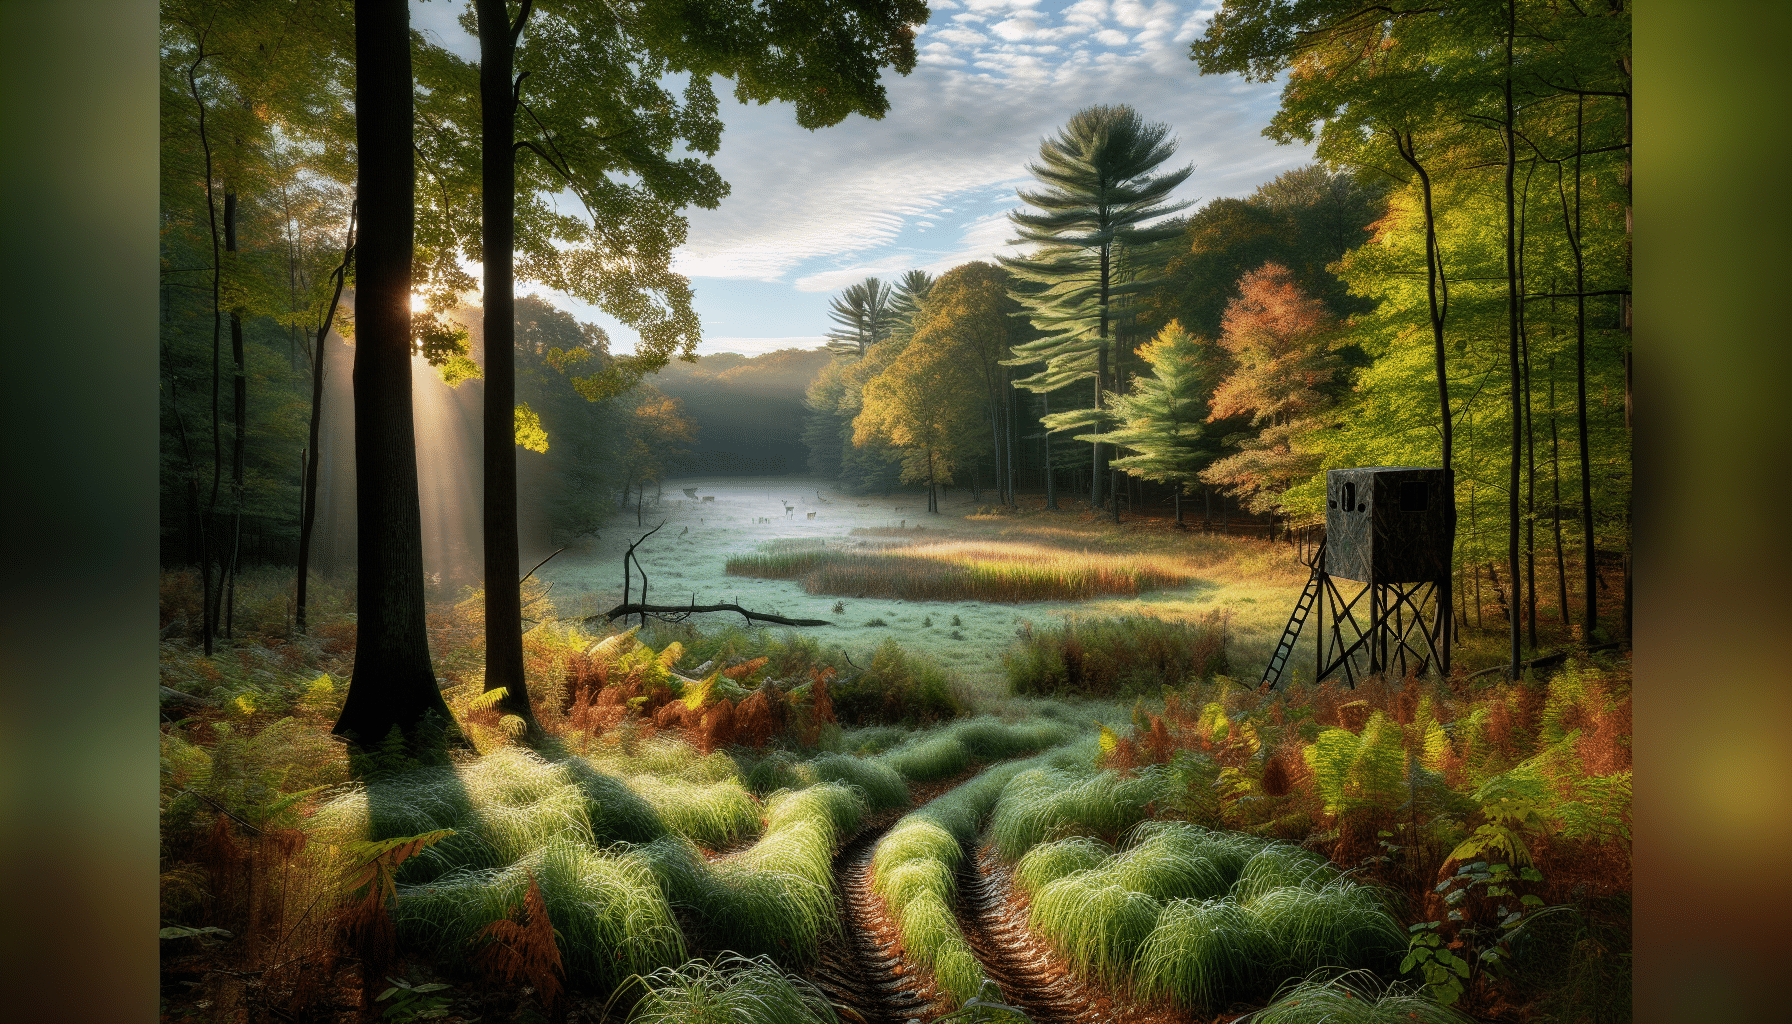 An early morning in a dense forest in Delaware with the sun barely peeking over the horizon casting long shadows on the dew-laced grass. A clearing ahead is surrounded by lush greenery and tall trees with vibrant autumnal colors. There's a well-camouflaged ground blind nearby discreetly nestled amongst the foliage. Deep deer tracks leading into the forest hint at the frequented path of the deer. Nearby, a natural salt lick can be spotted, known to attract local wildlife, especially deer. A well-positioned tree stand is visible higher up in a tall, sturdy tree providing a great vantage point for spotting deer.